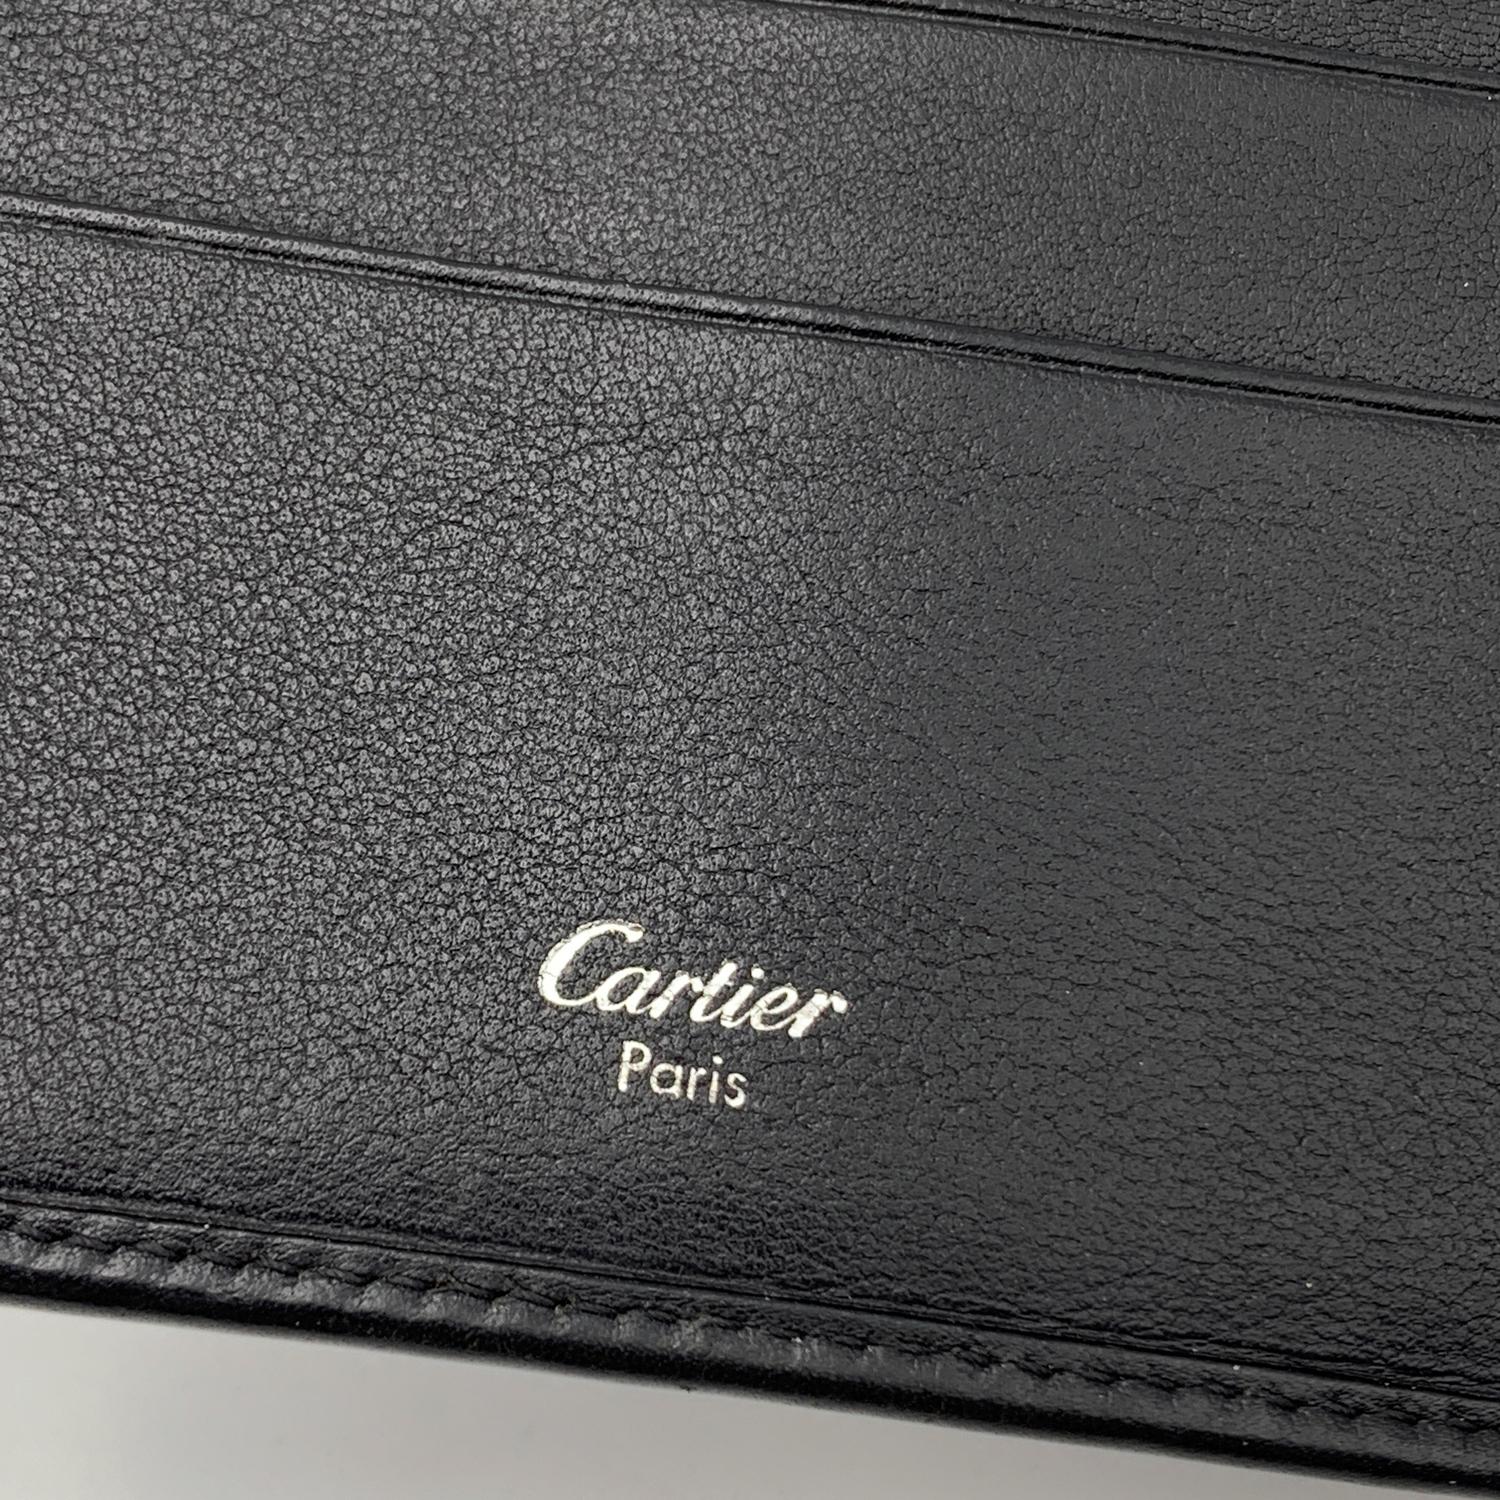 Cartier Black Leather Trinity Wallet Compact Coin Purse 4